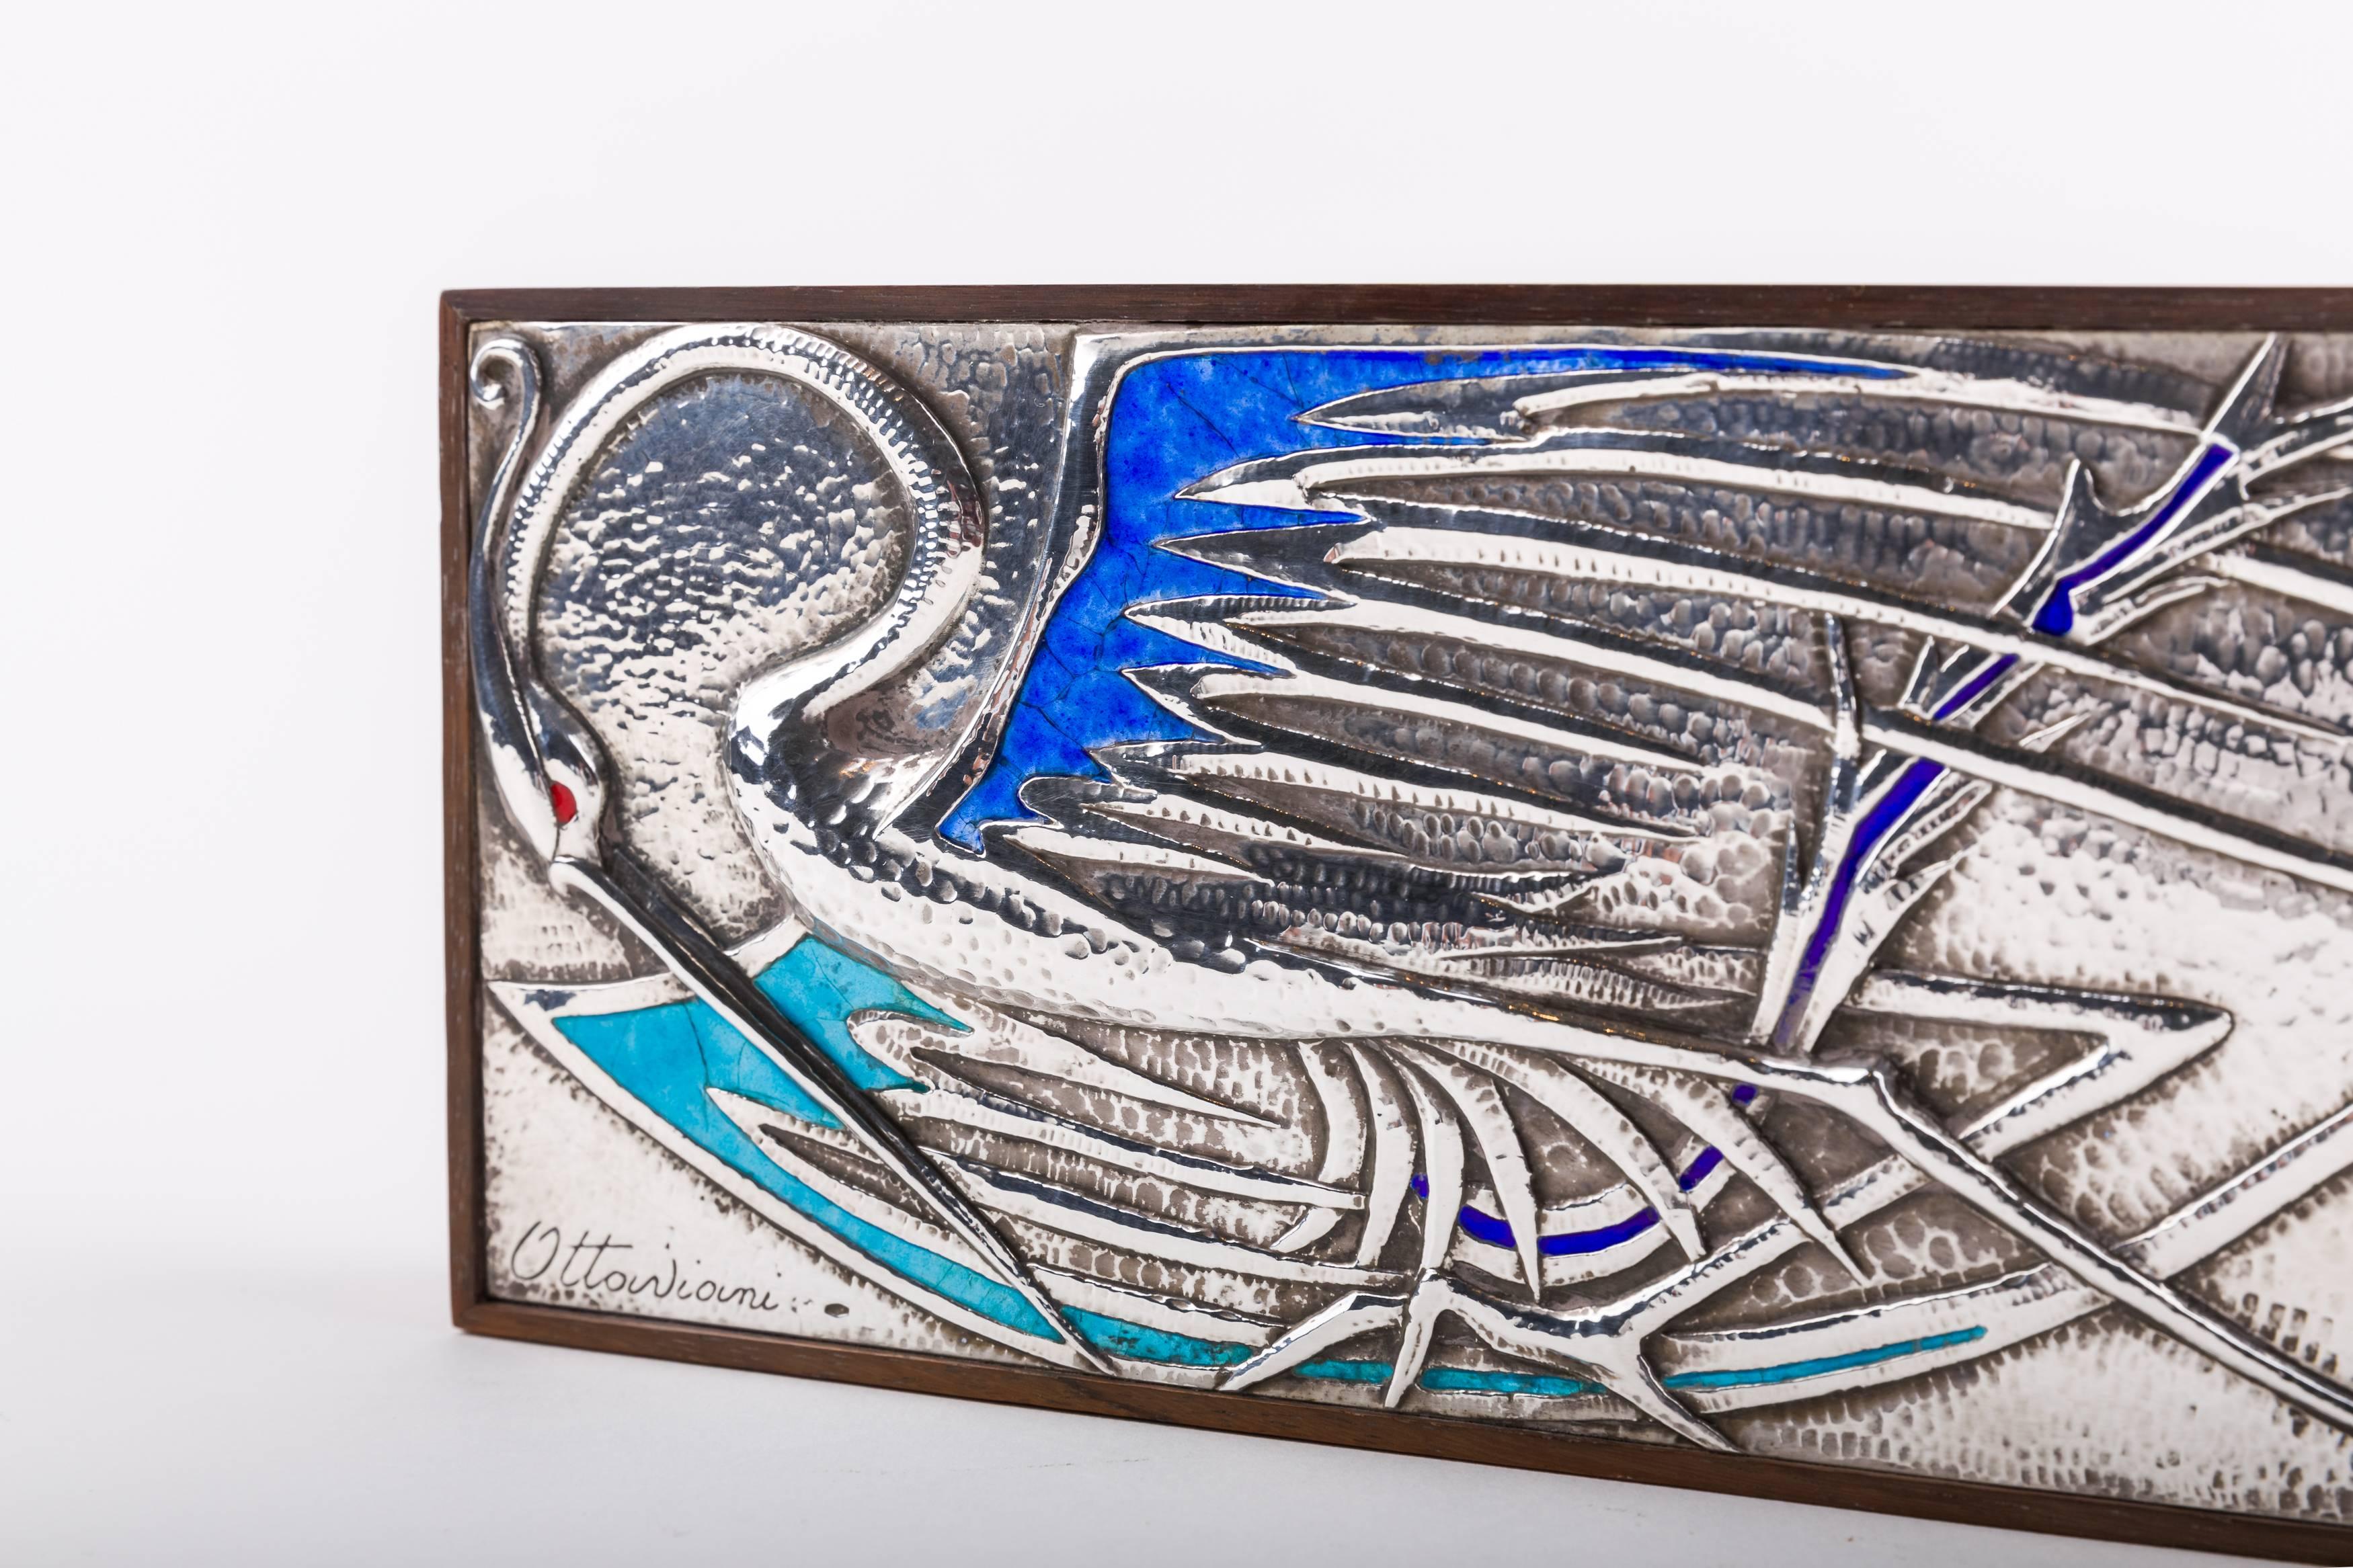 Rosewood box decorated with a sterling silver and enamel plaque by the Italian silversmith Ottaviani, circa 1960s. Signed with the maker’s signature and “925”.
Notes: Ottaviani (1945-contemporary) is a jewelry and silver firm located in the small